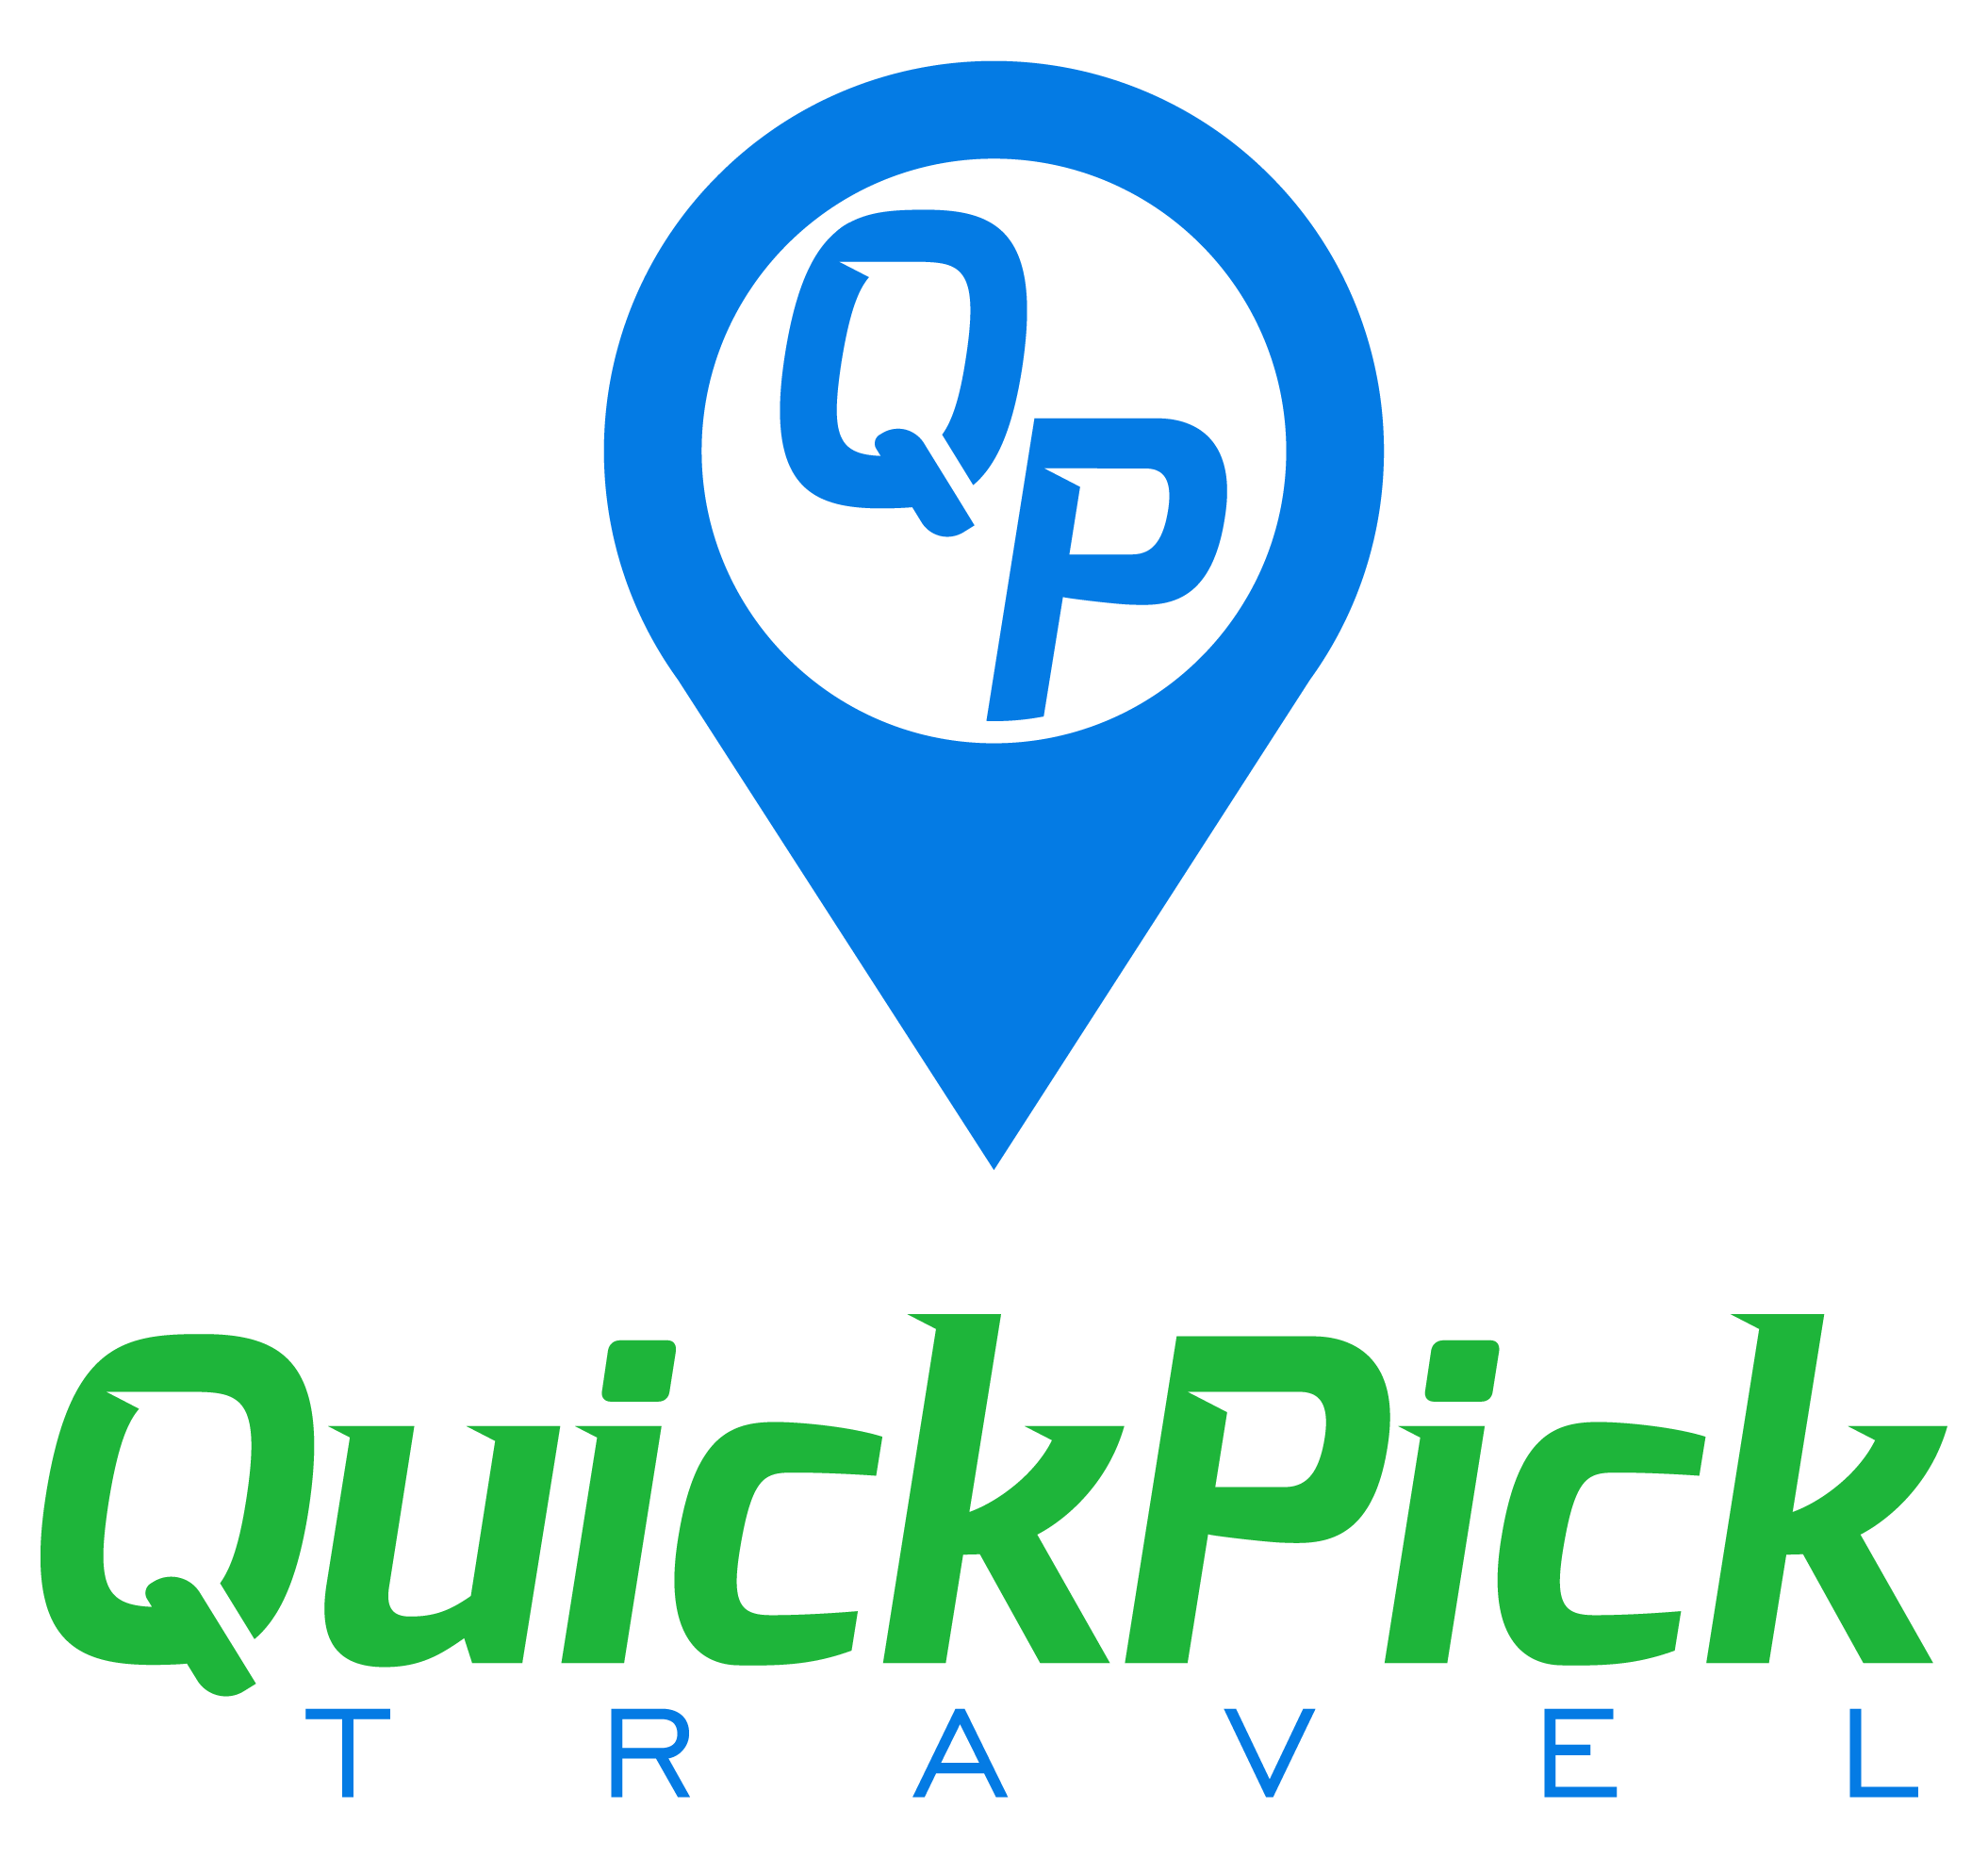 QuickPick Travel: The Online Travel Industry's Surprise New Player